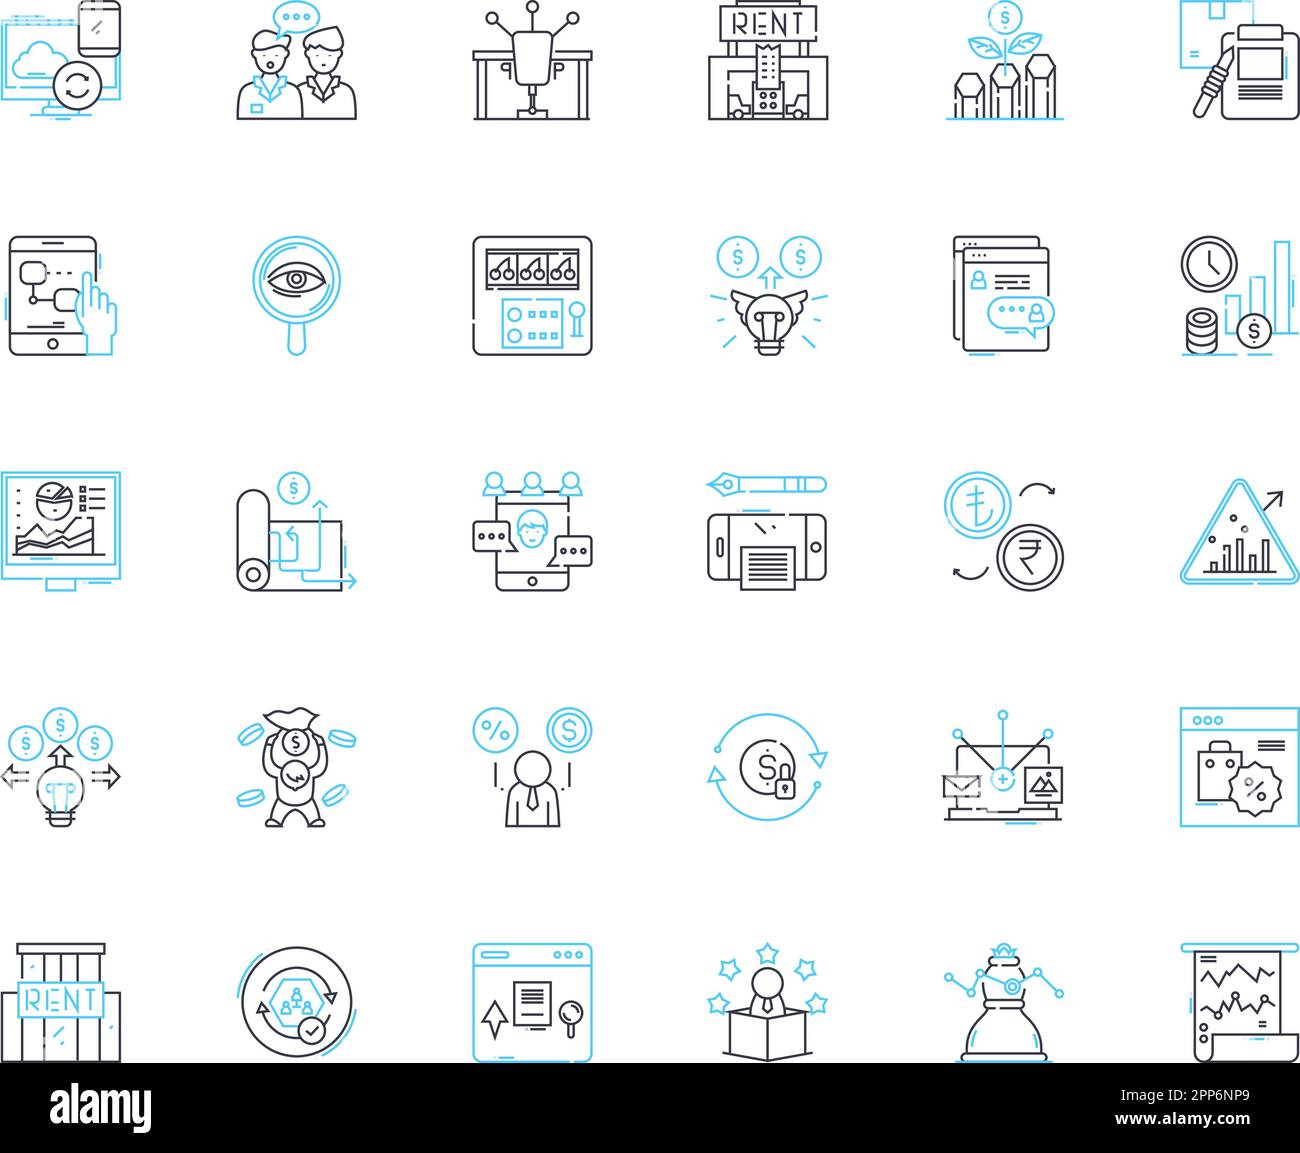 Economic understanding and awareness linear icons set. Budgeting, Inflation, Financial literacy, Entrepreneurship, Investment, Taxation, Debts line Stock Vector